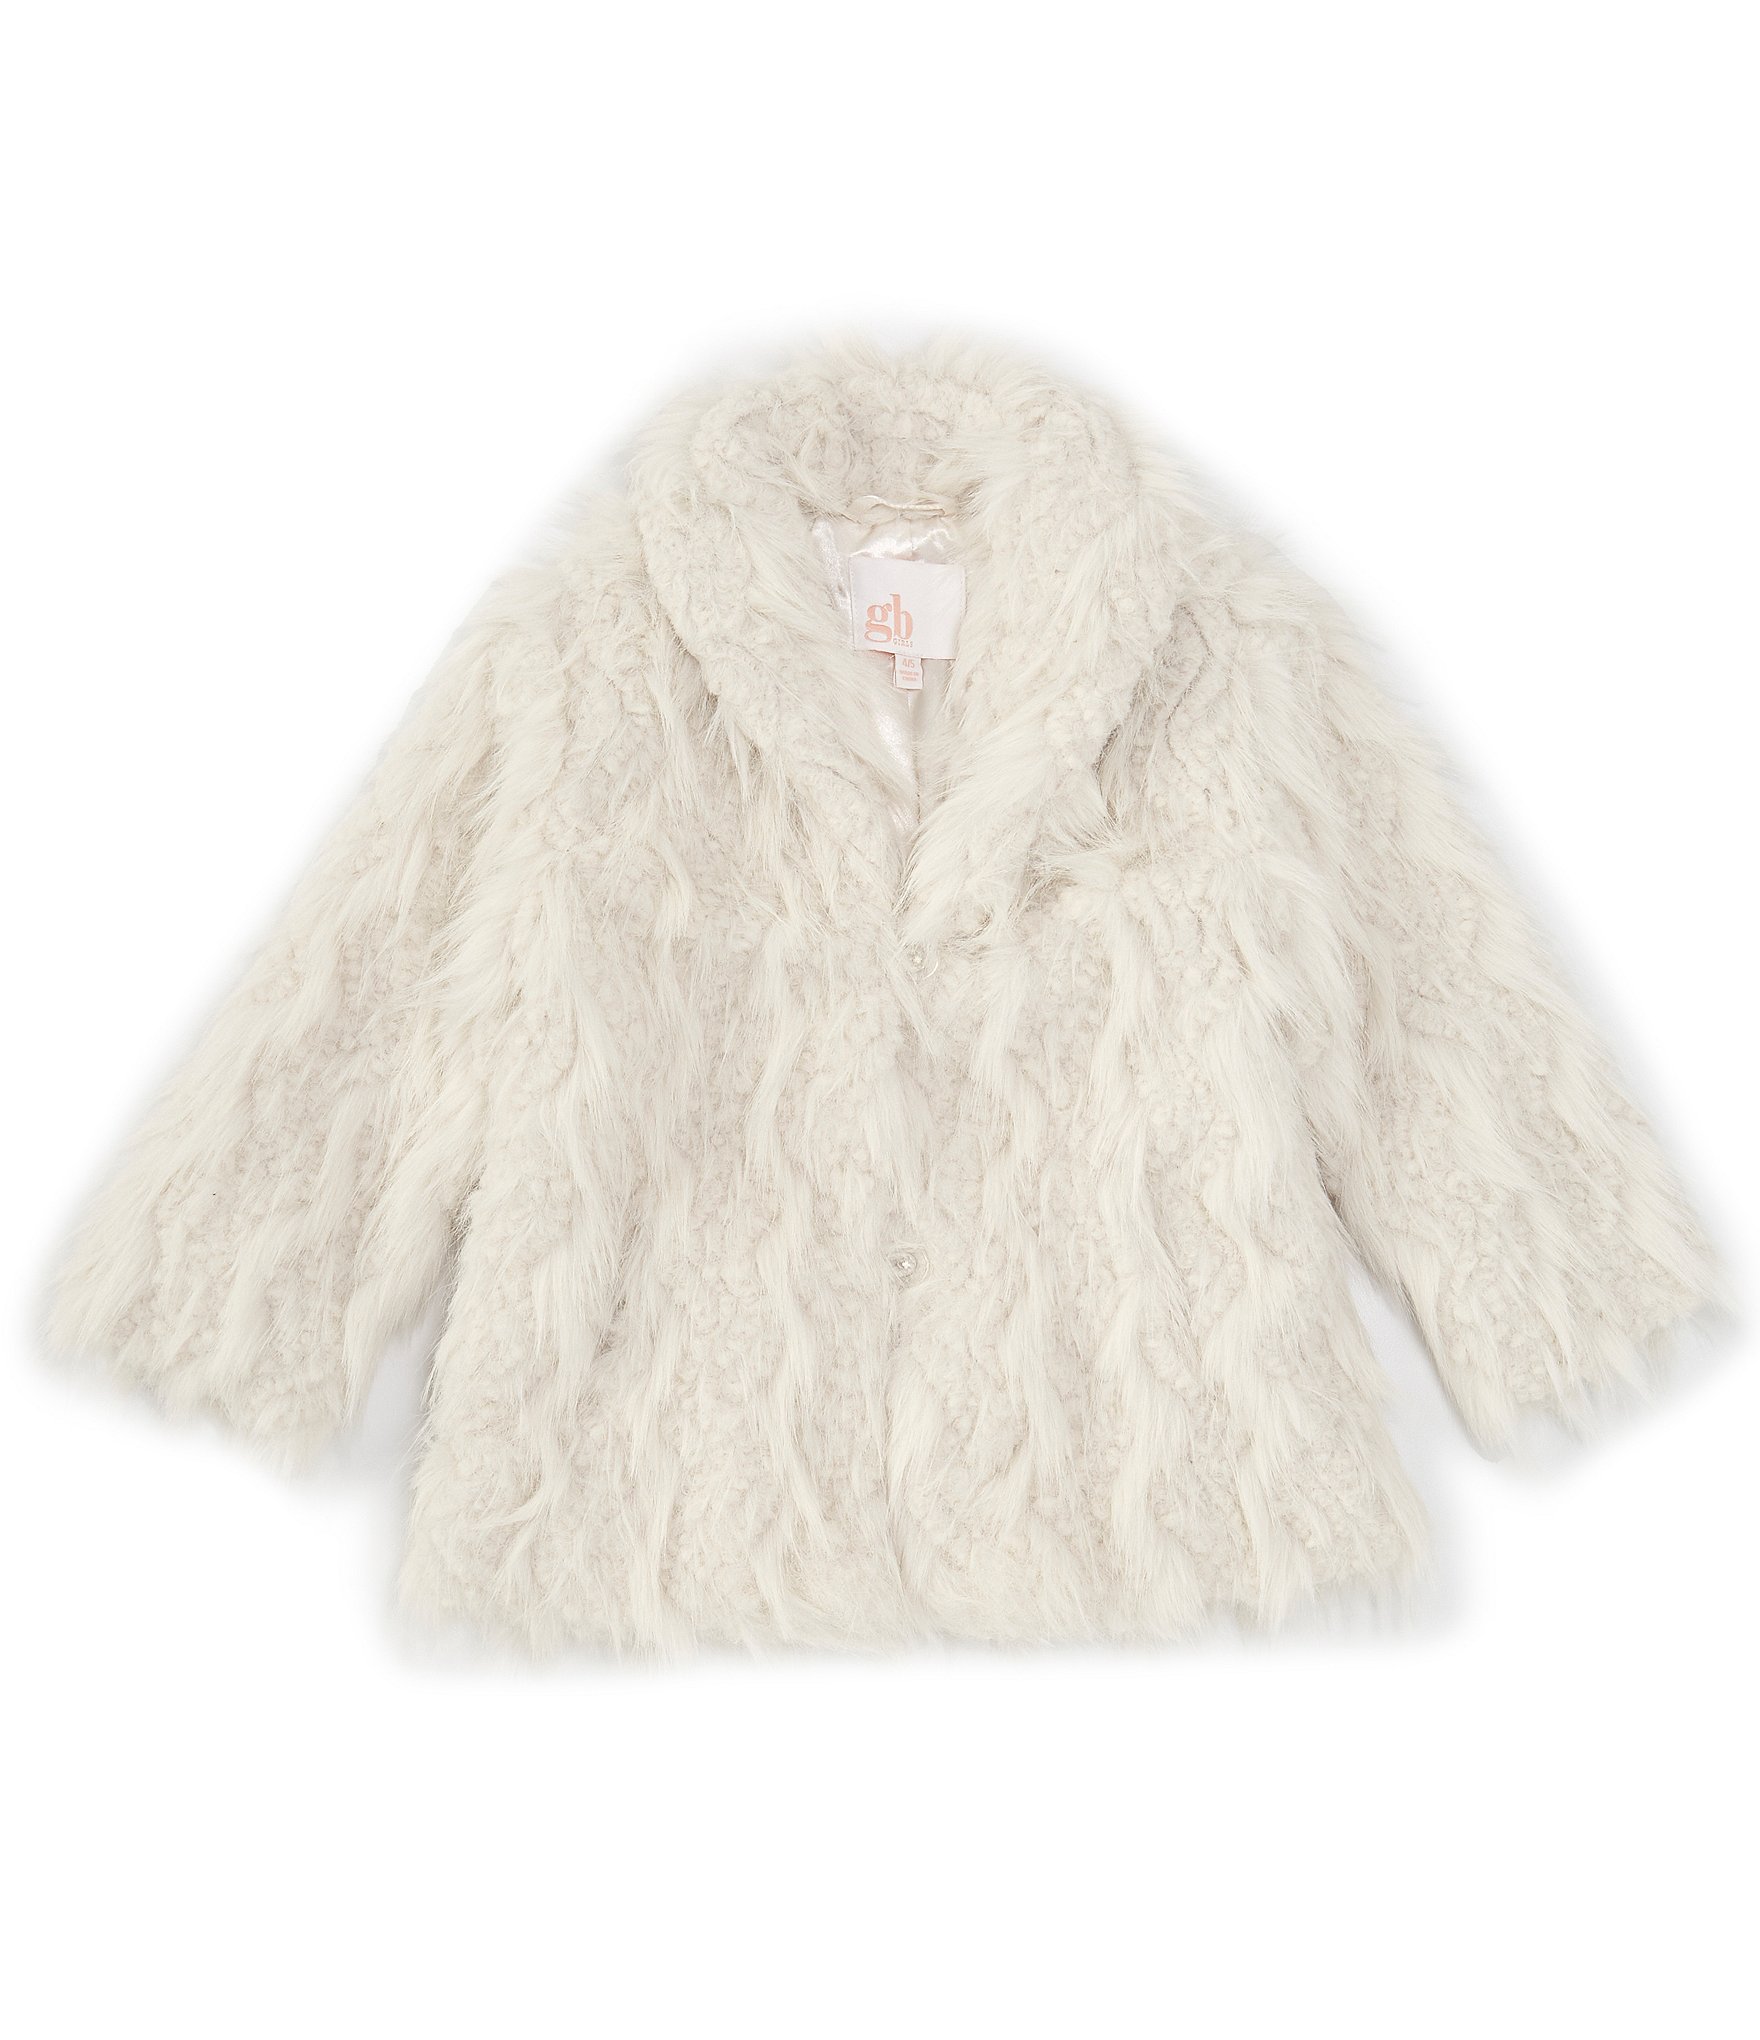 Guess Baby Girls 3-24 Months Sleeveless Faux-Fur Vest, Long-Sleeve